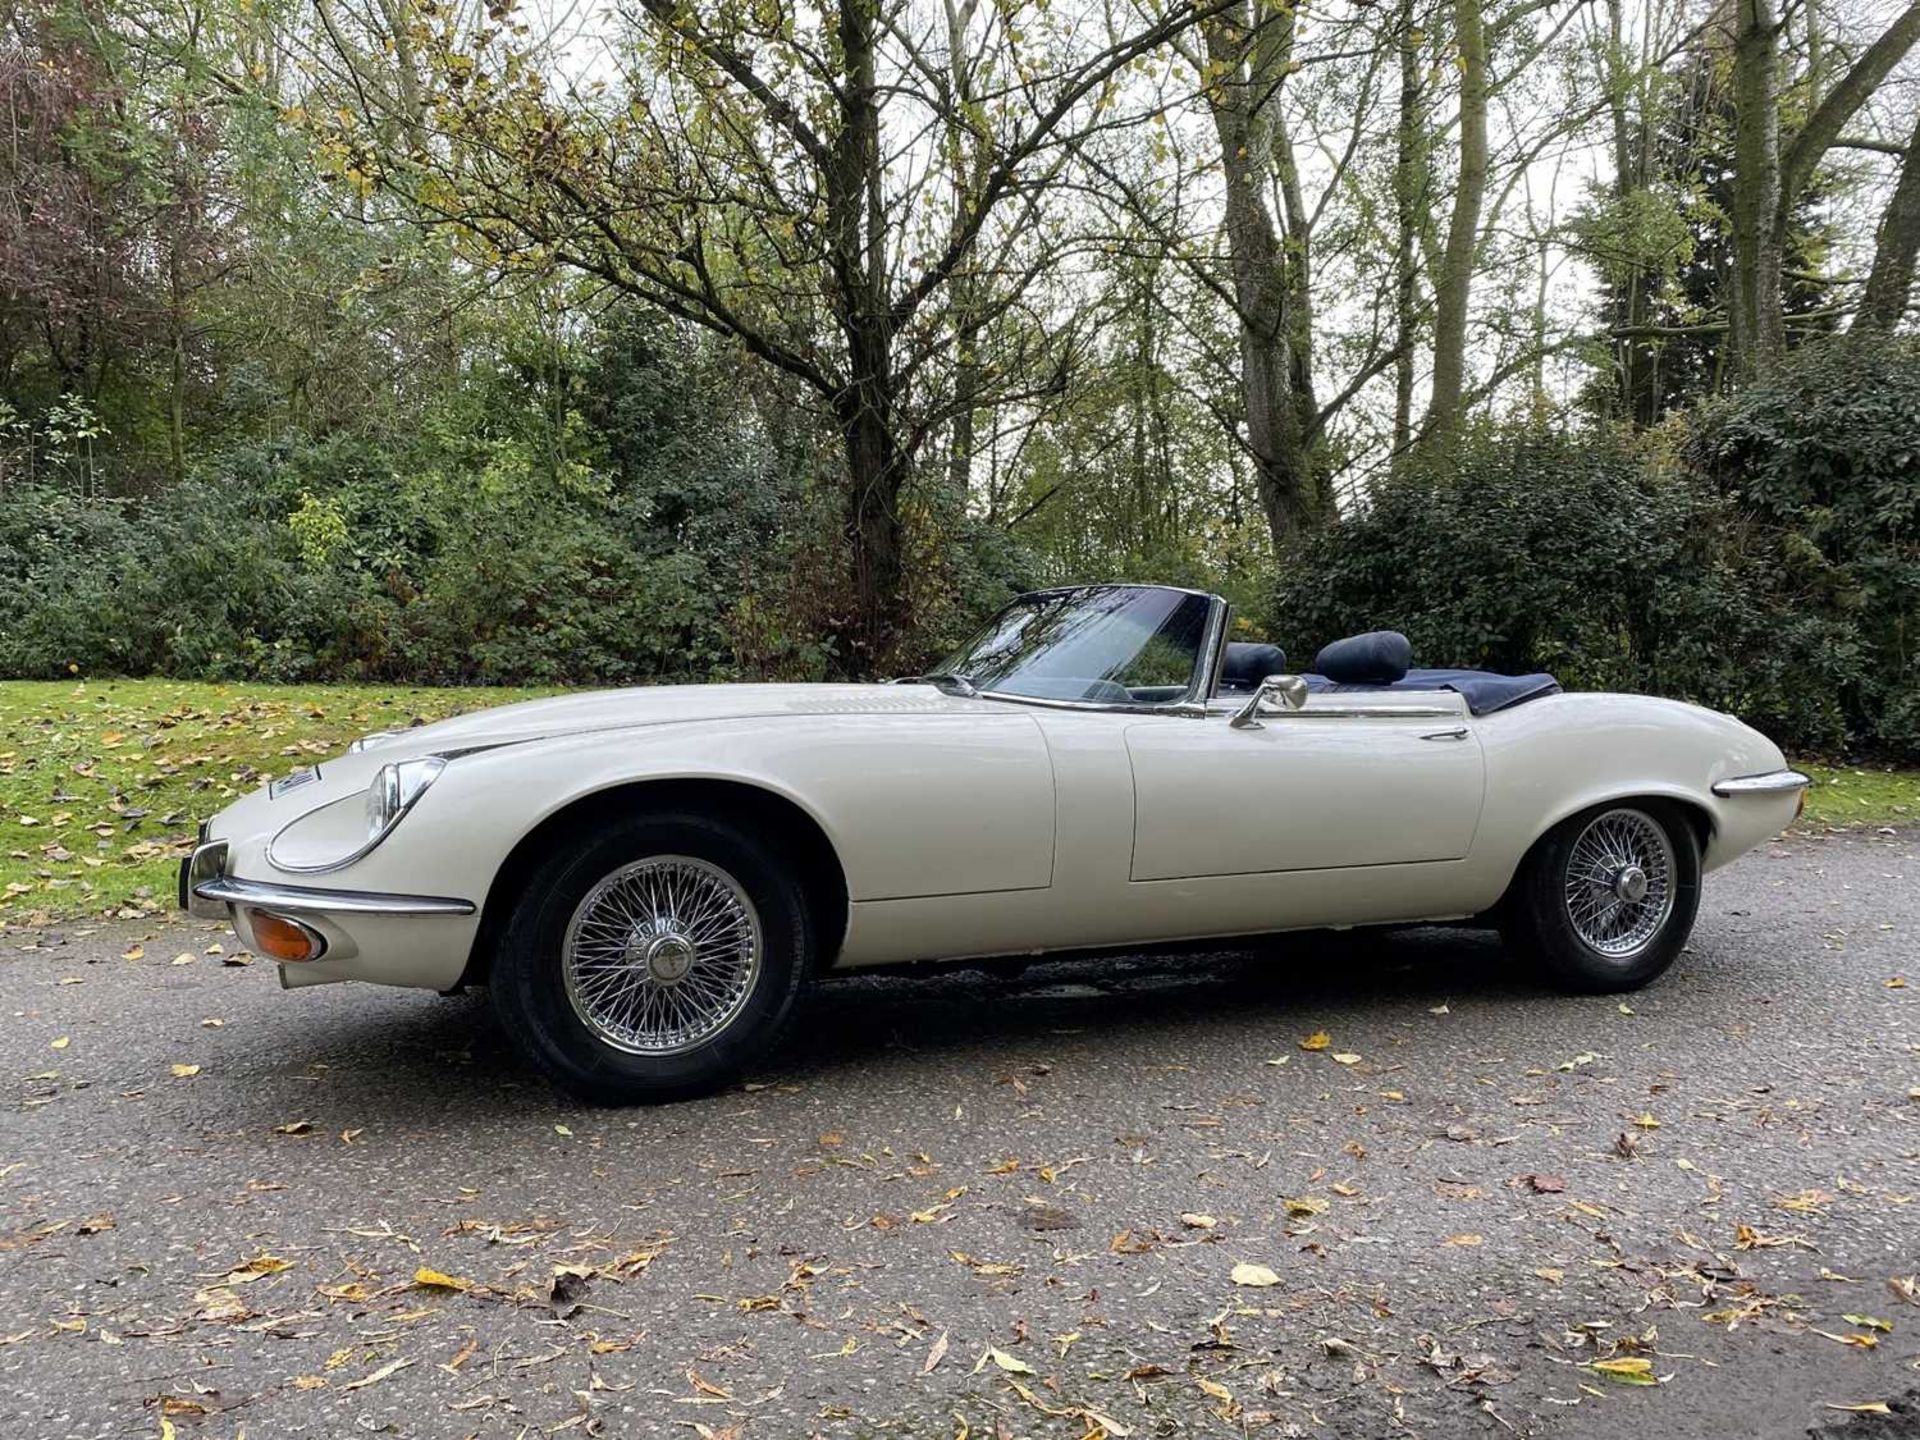 1973 Jaguar E-Type V12 Roadster As seen in Only Fools and Horses - Image 14 of 105